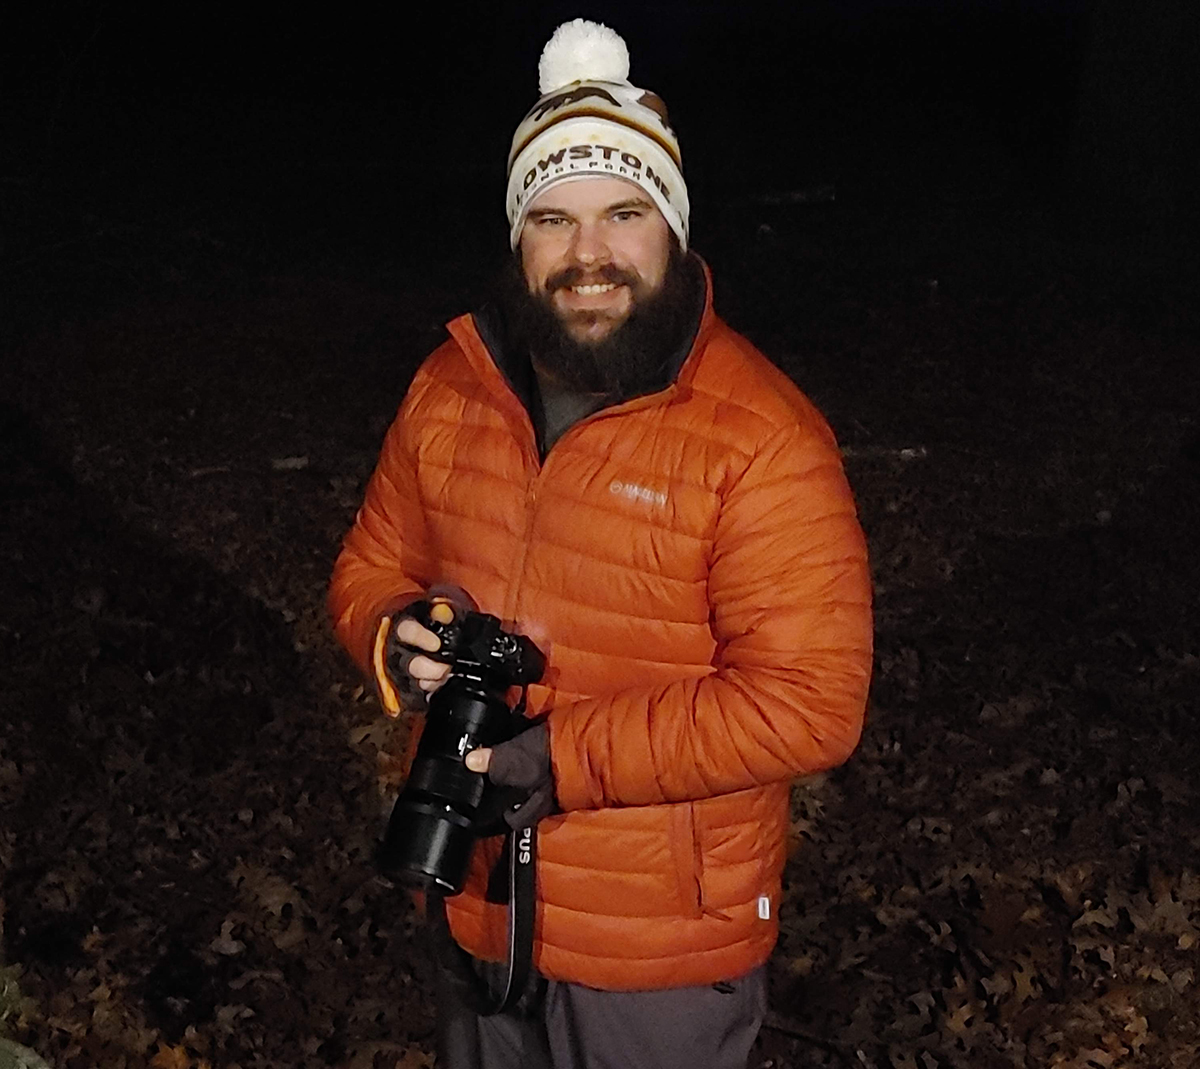 Adam testing out his winter gear and camera.